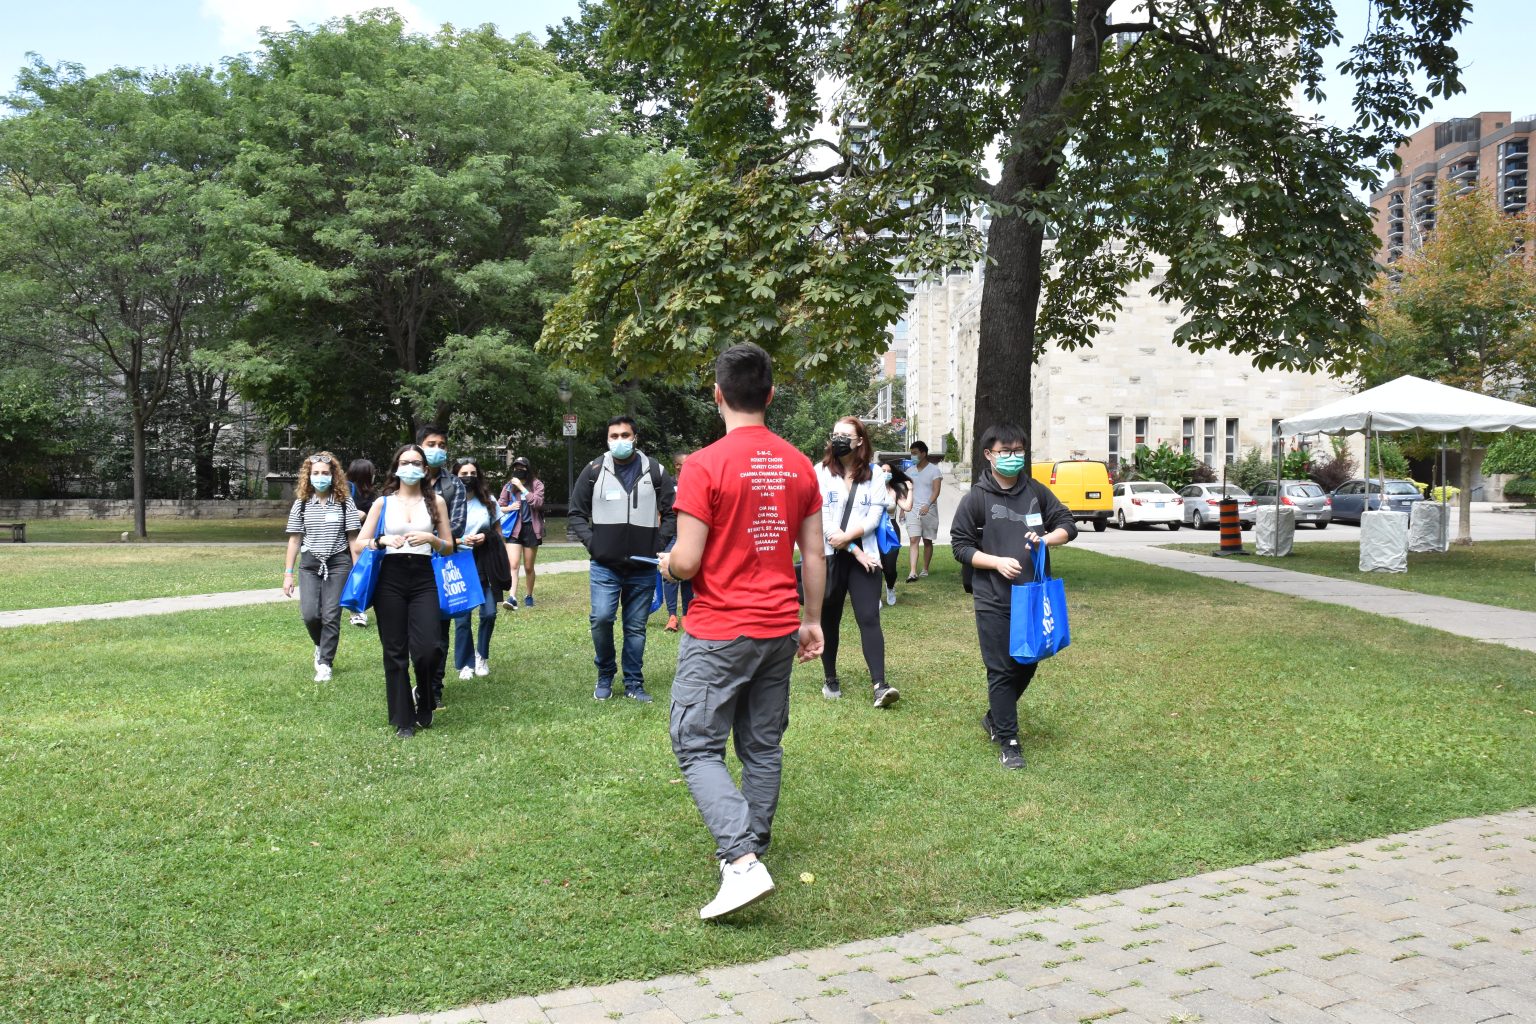 Photograph of new St. Mike's students walking on the St. Mike's quad, following an orientation leader with his back to the camera